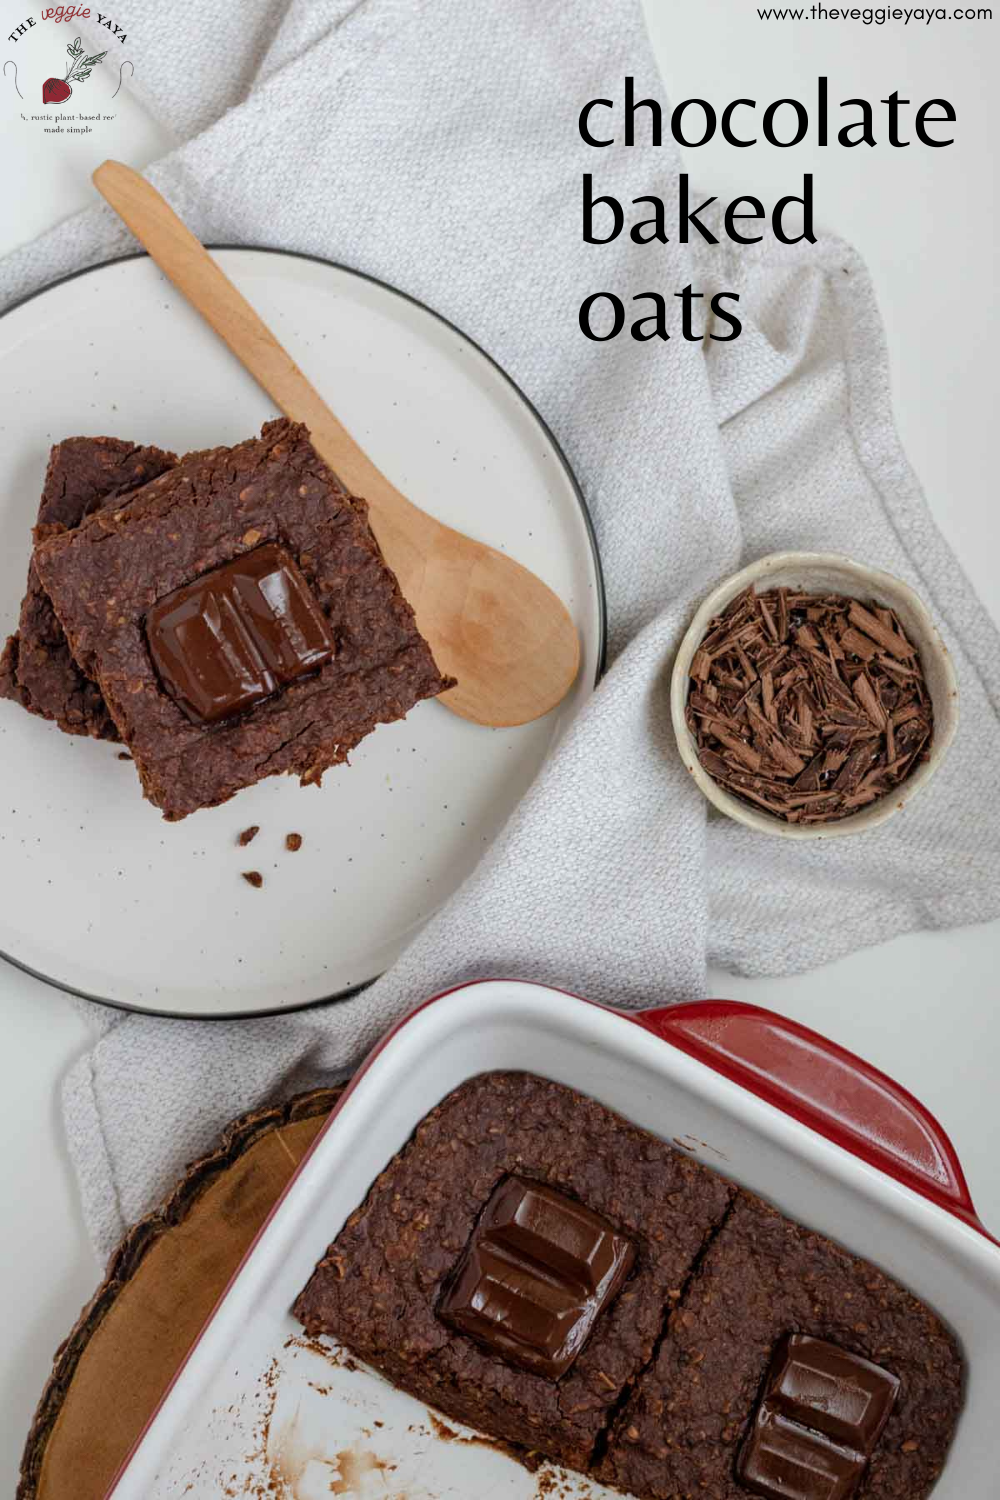 A plate of chocolate baked oats and the pan.